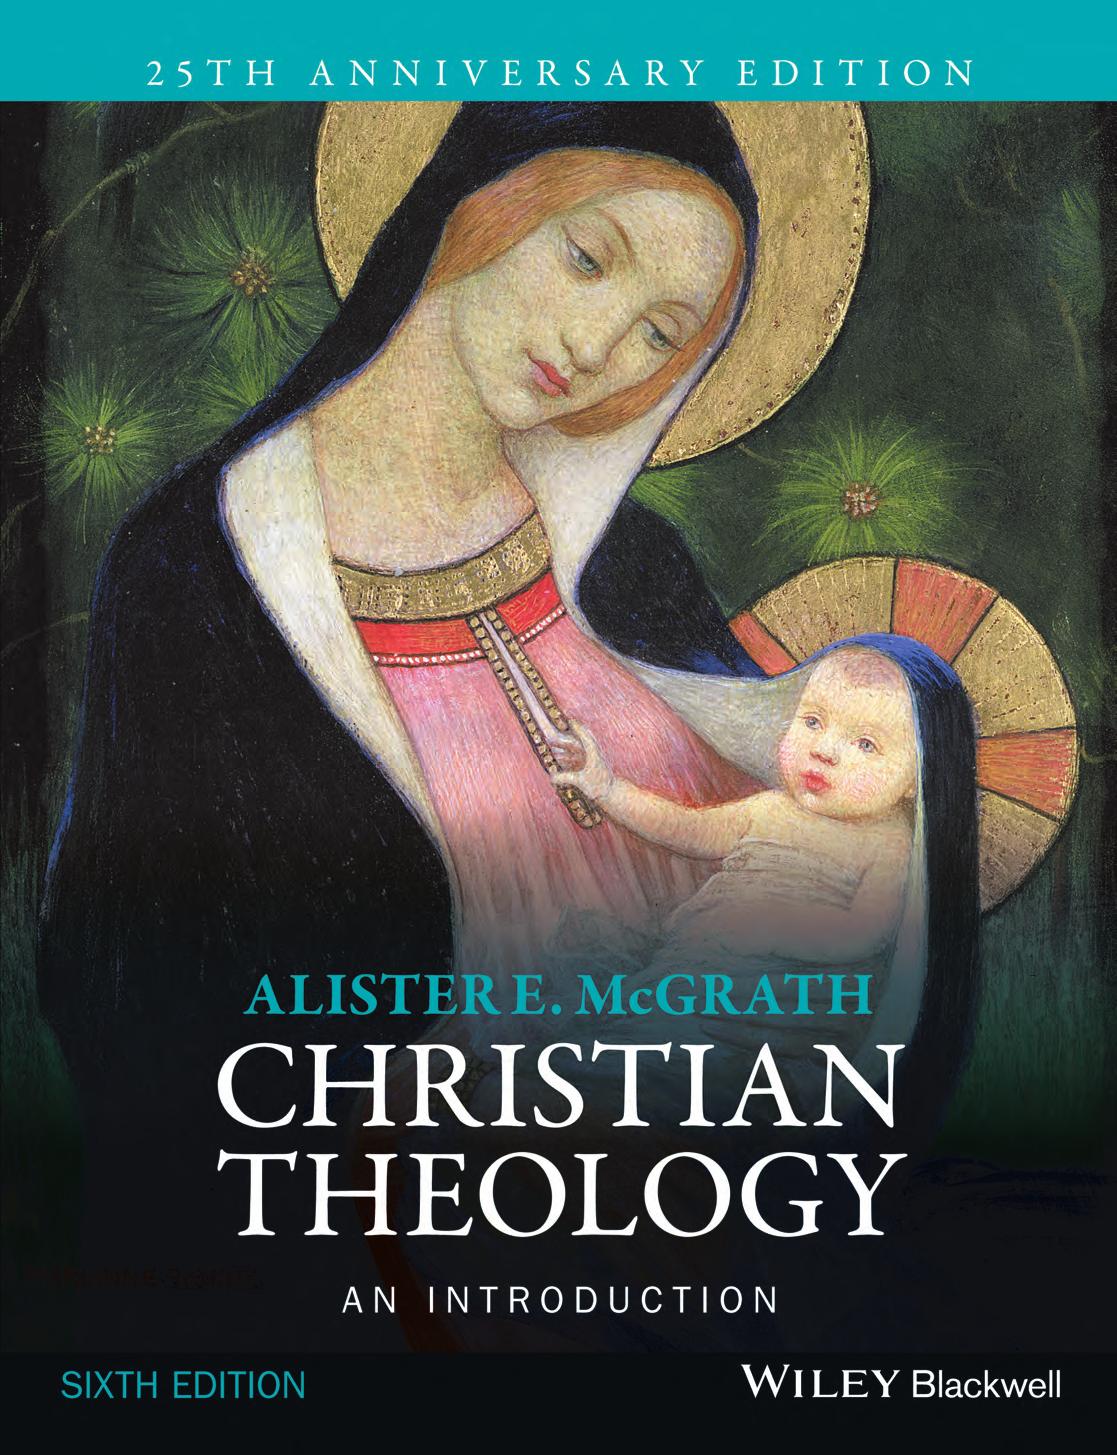 Christian Theology: An Introduction by Alister E. McGrath